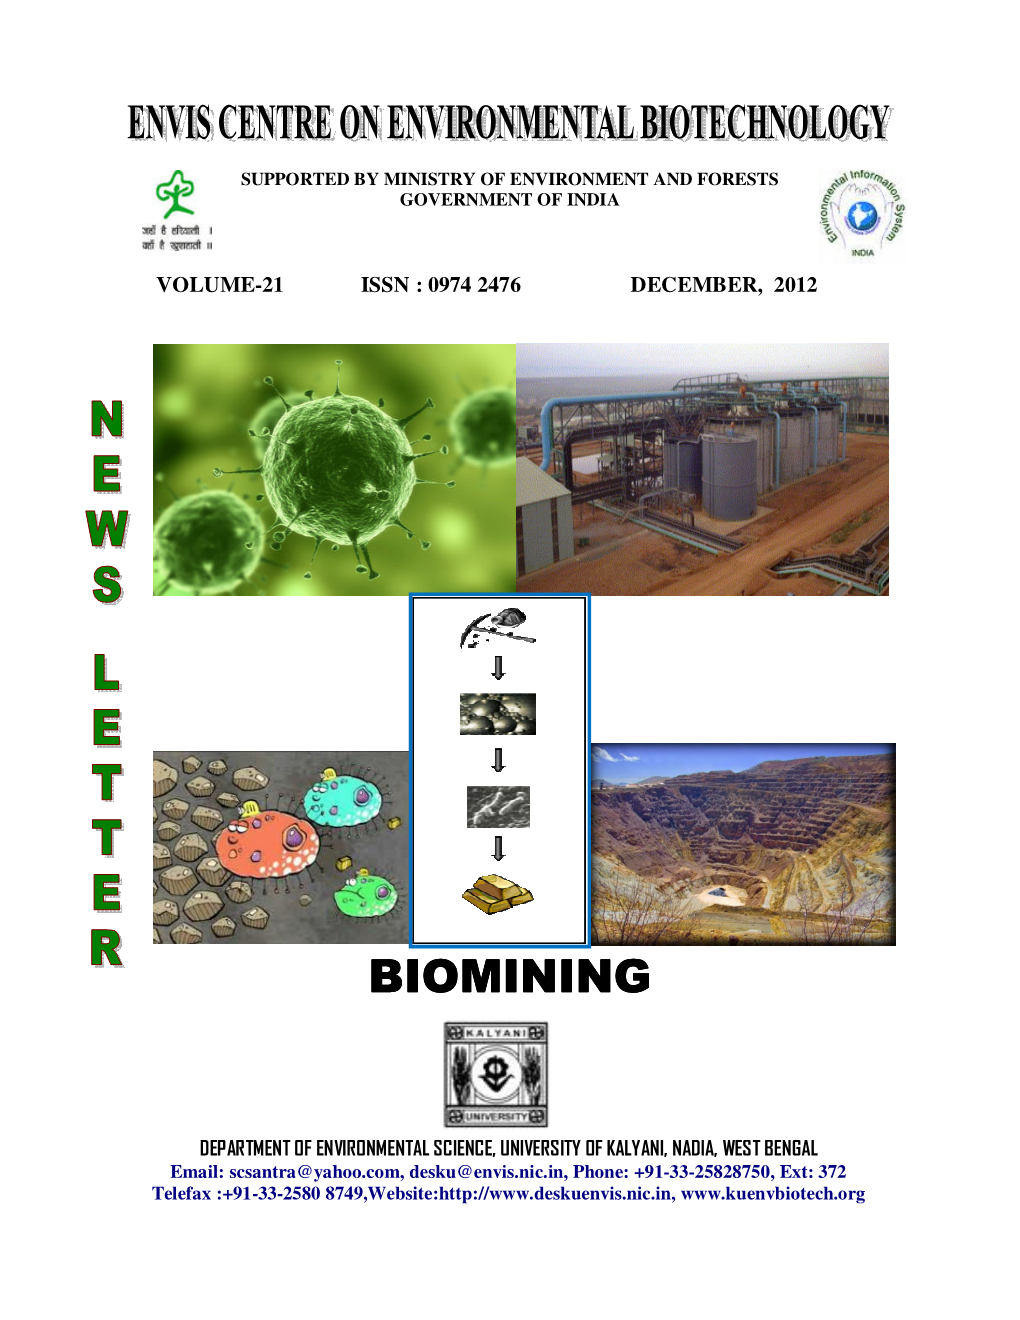 Biomining Biomining Or the "Mining of the Future"